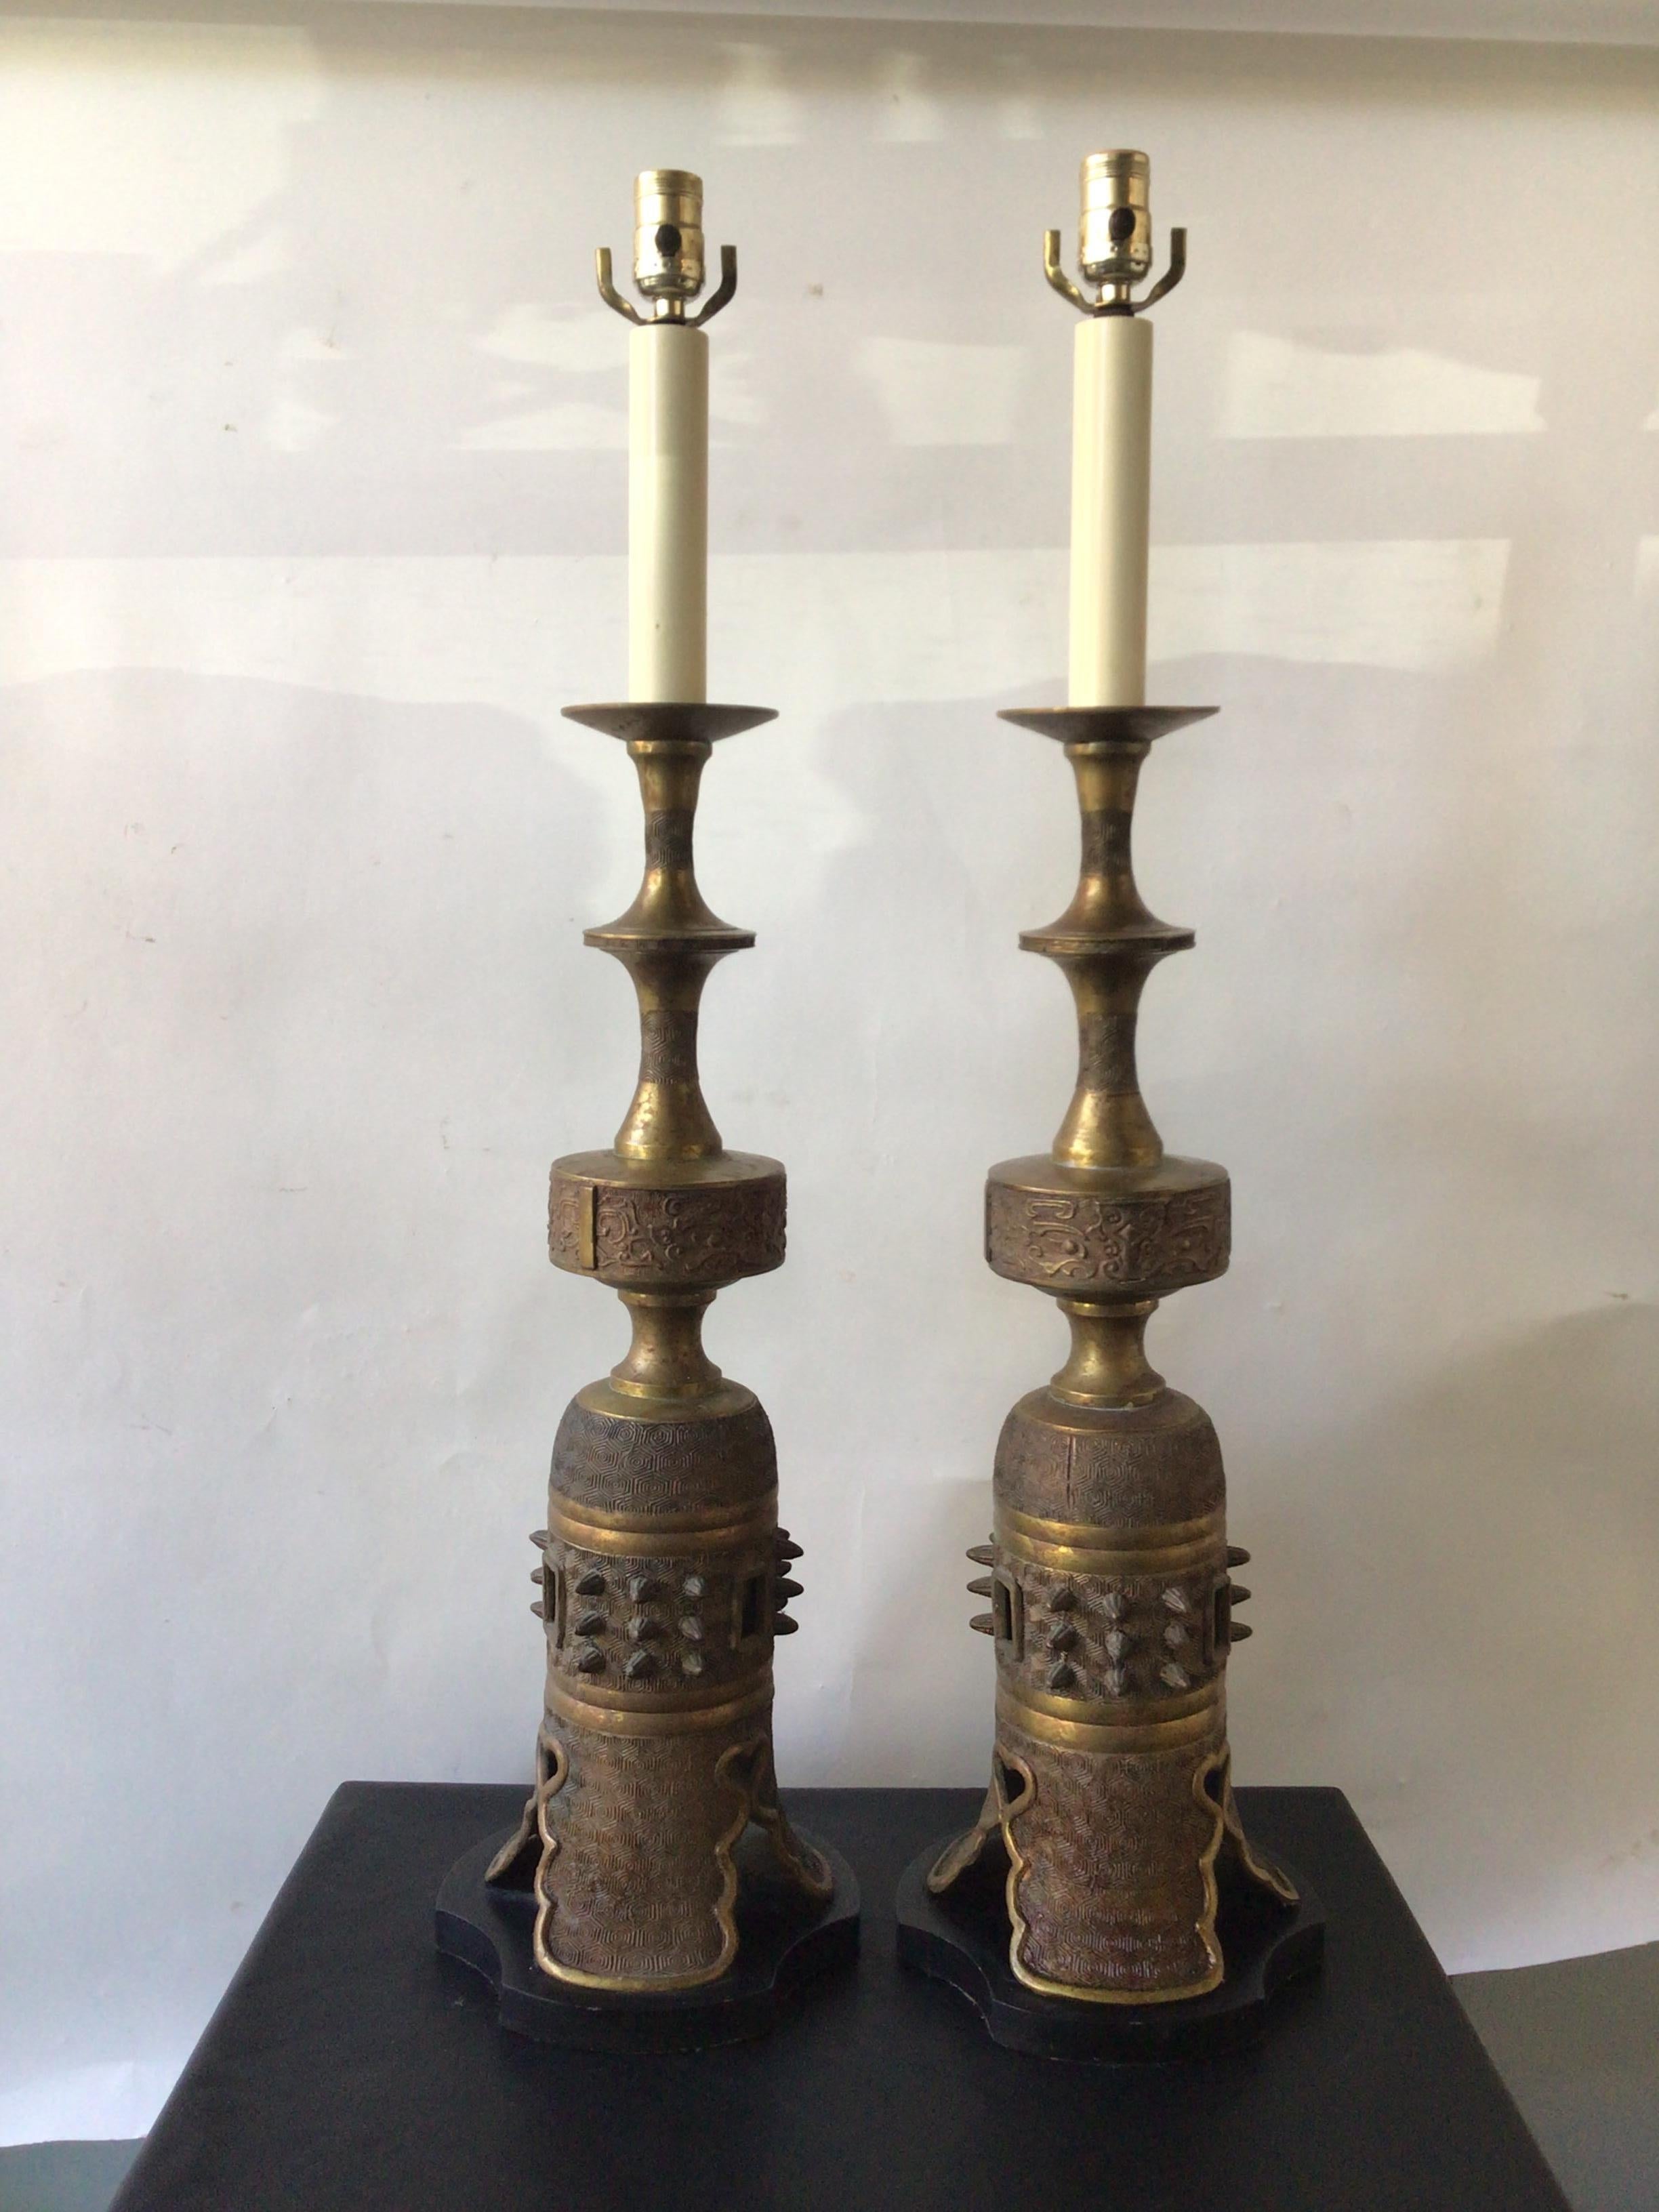 Pair of 1950s James Mount style bronze Asian lamps on metal bases.